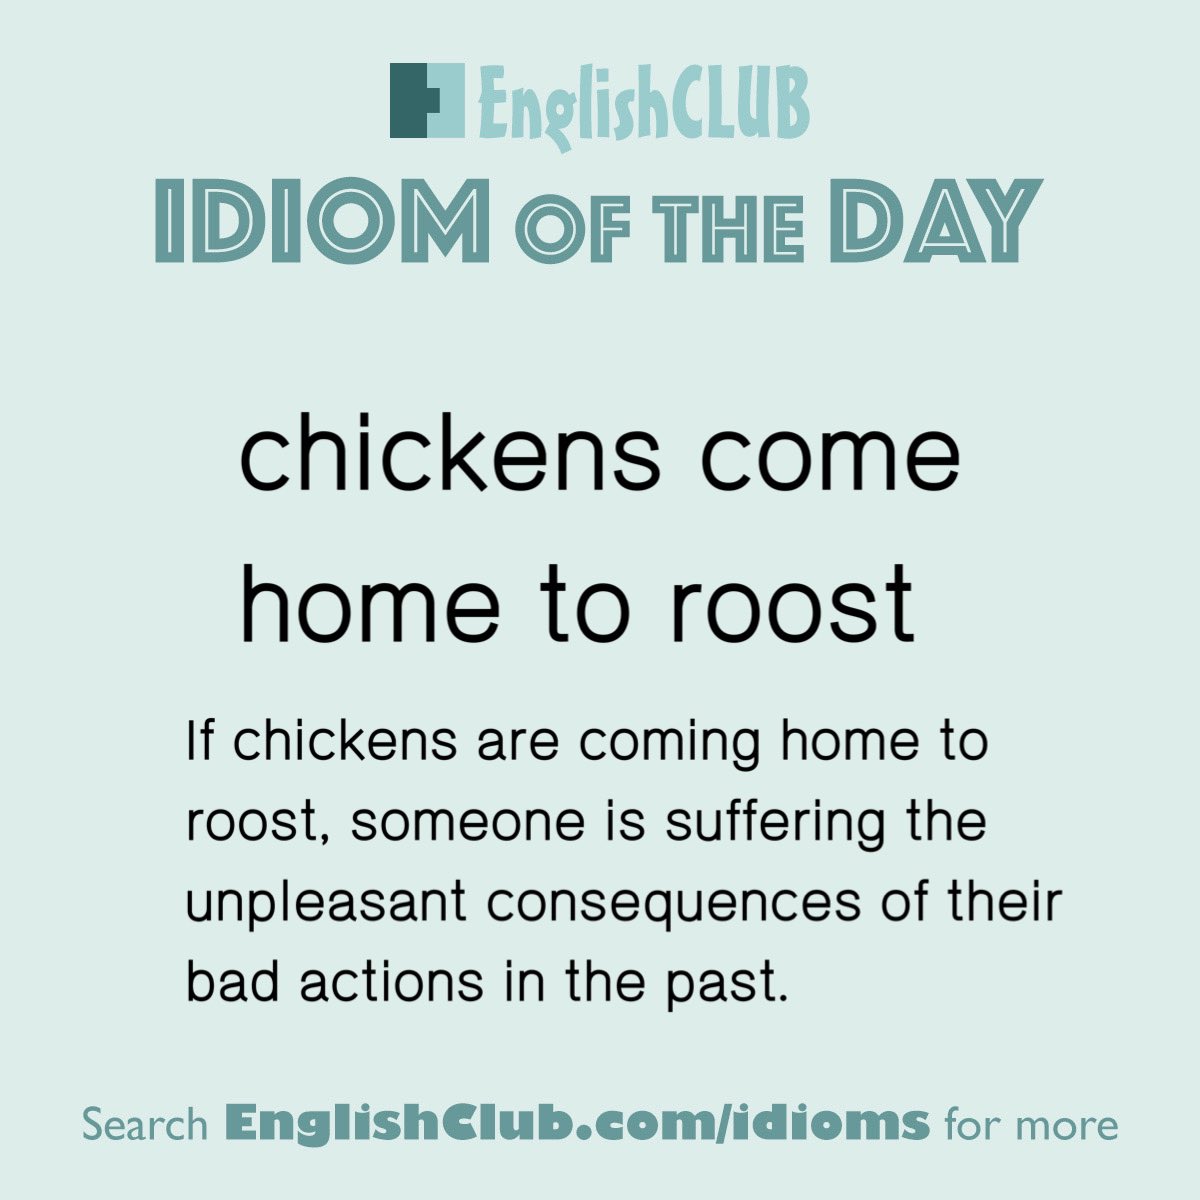 For example sentences and much more see EnglishClub.com/word-of-the-day